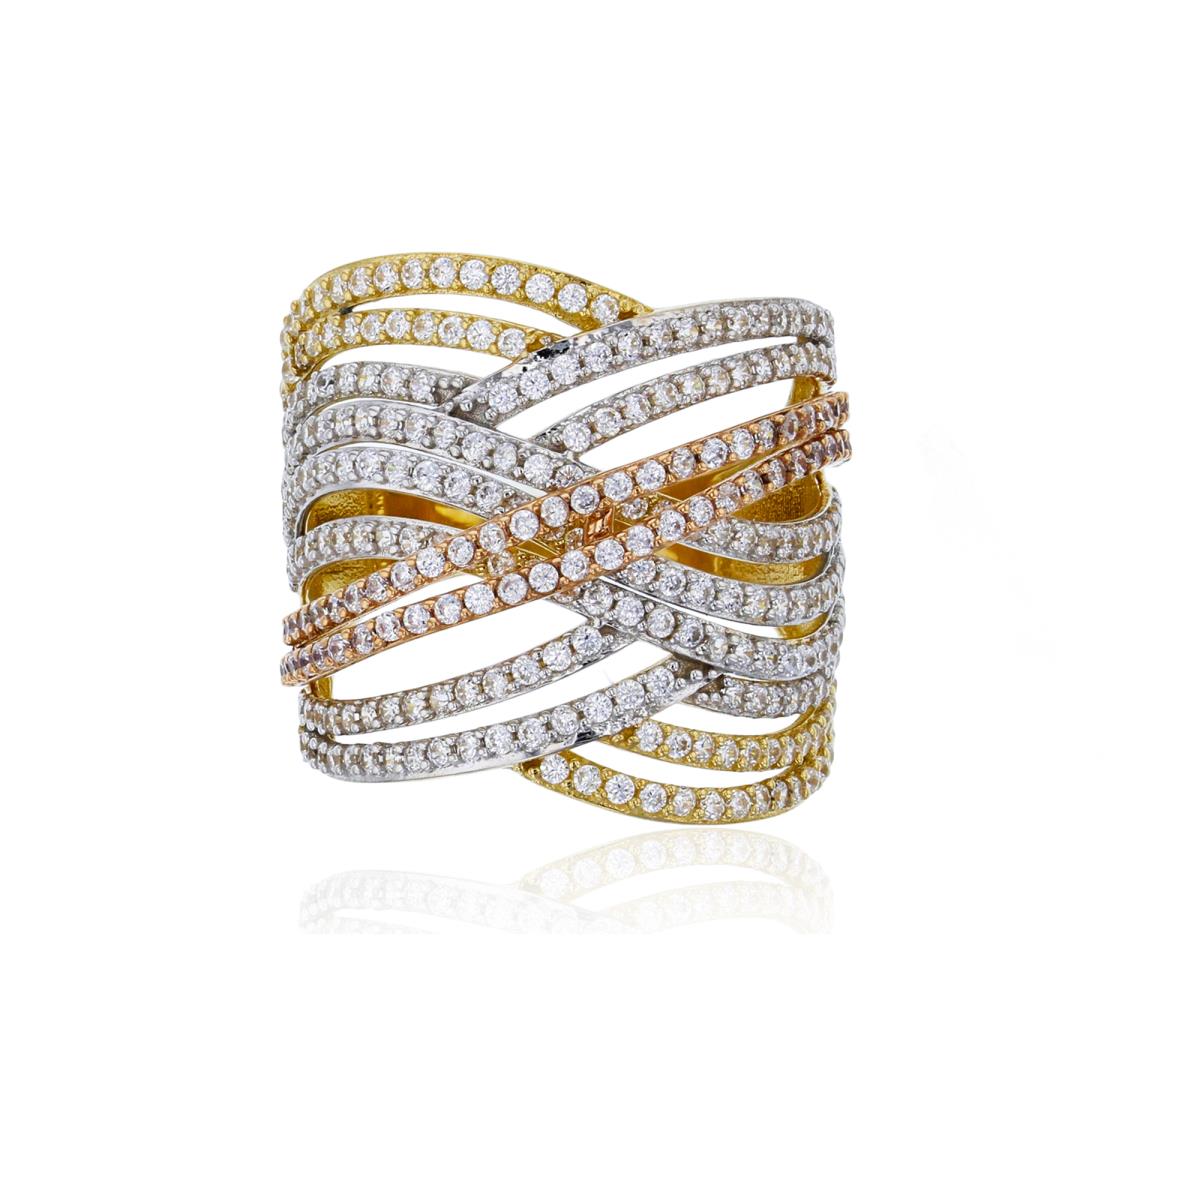 10K Tricolor Gold Micropave Criss Cross Fashion Ring